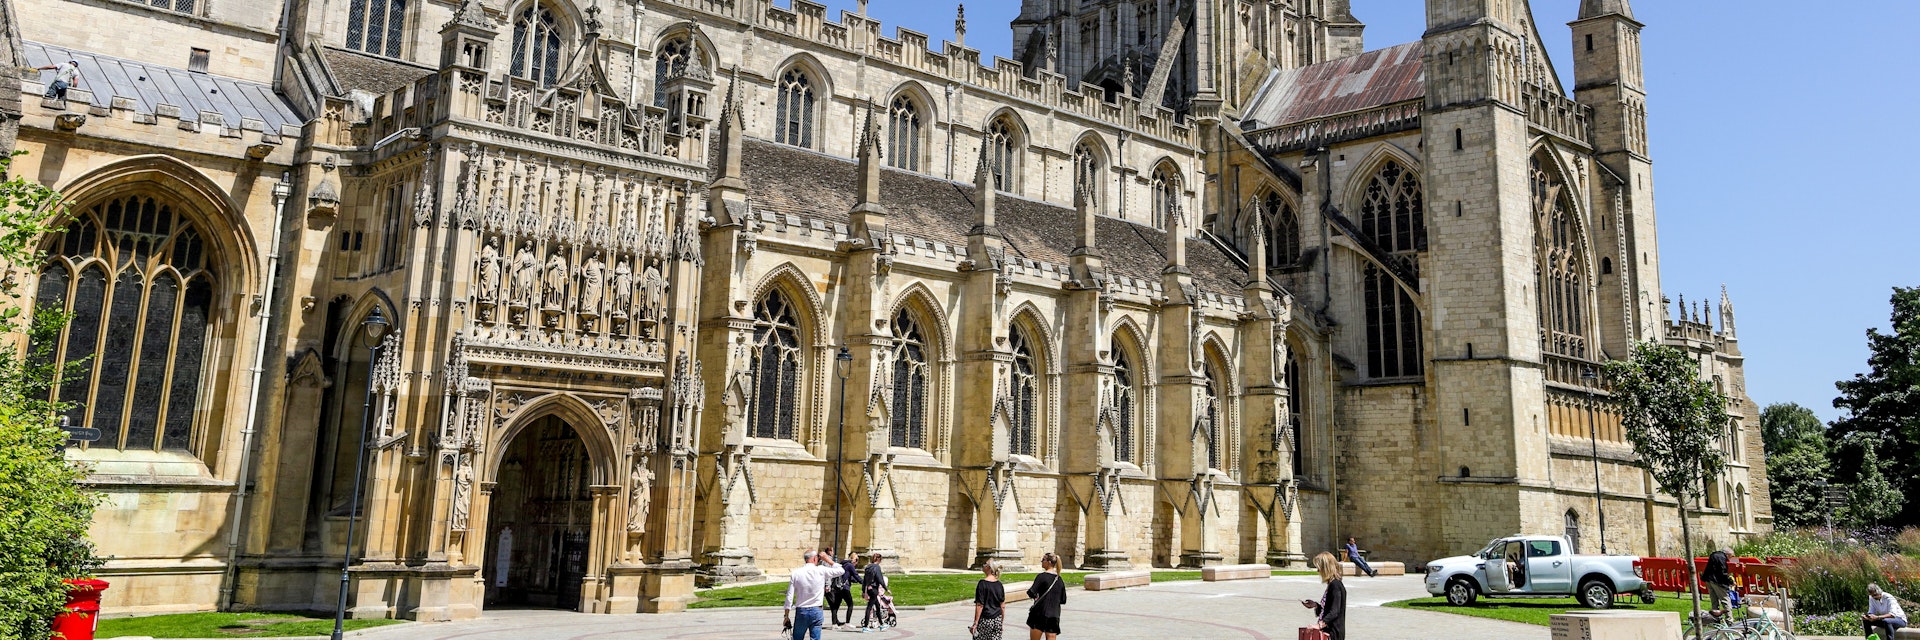 Gloucester Gloucestershire UK 1st JULY 2019  Iconic and historic Gloucester Cathedral with tourists ; Shutterstock ID 1443426806; your: Bridget Brown; gl: 65050; netsuite: Online Editorial; full: POI Image Update